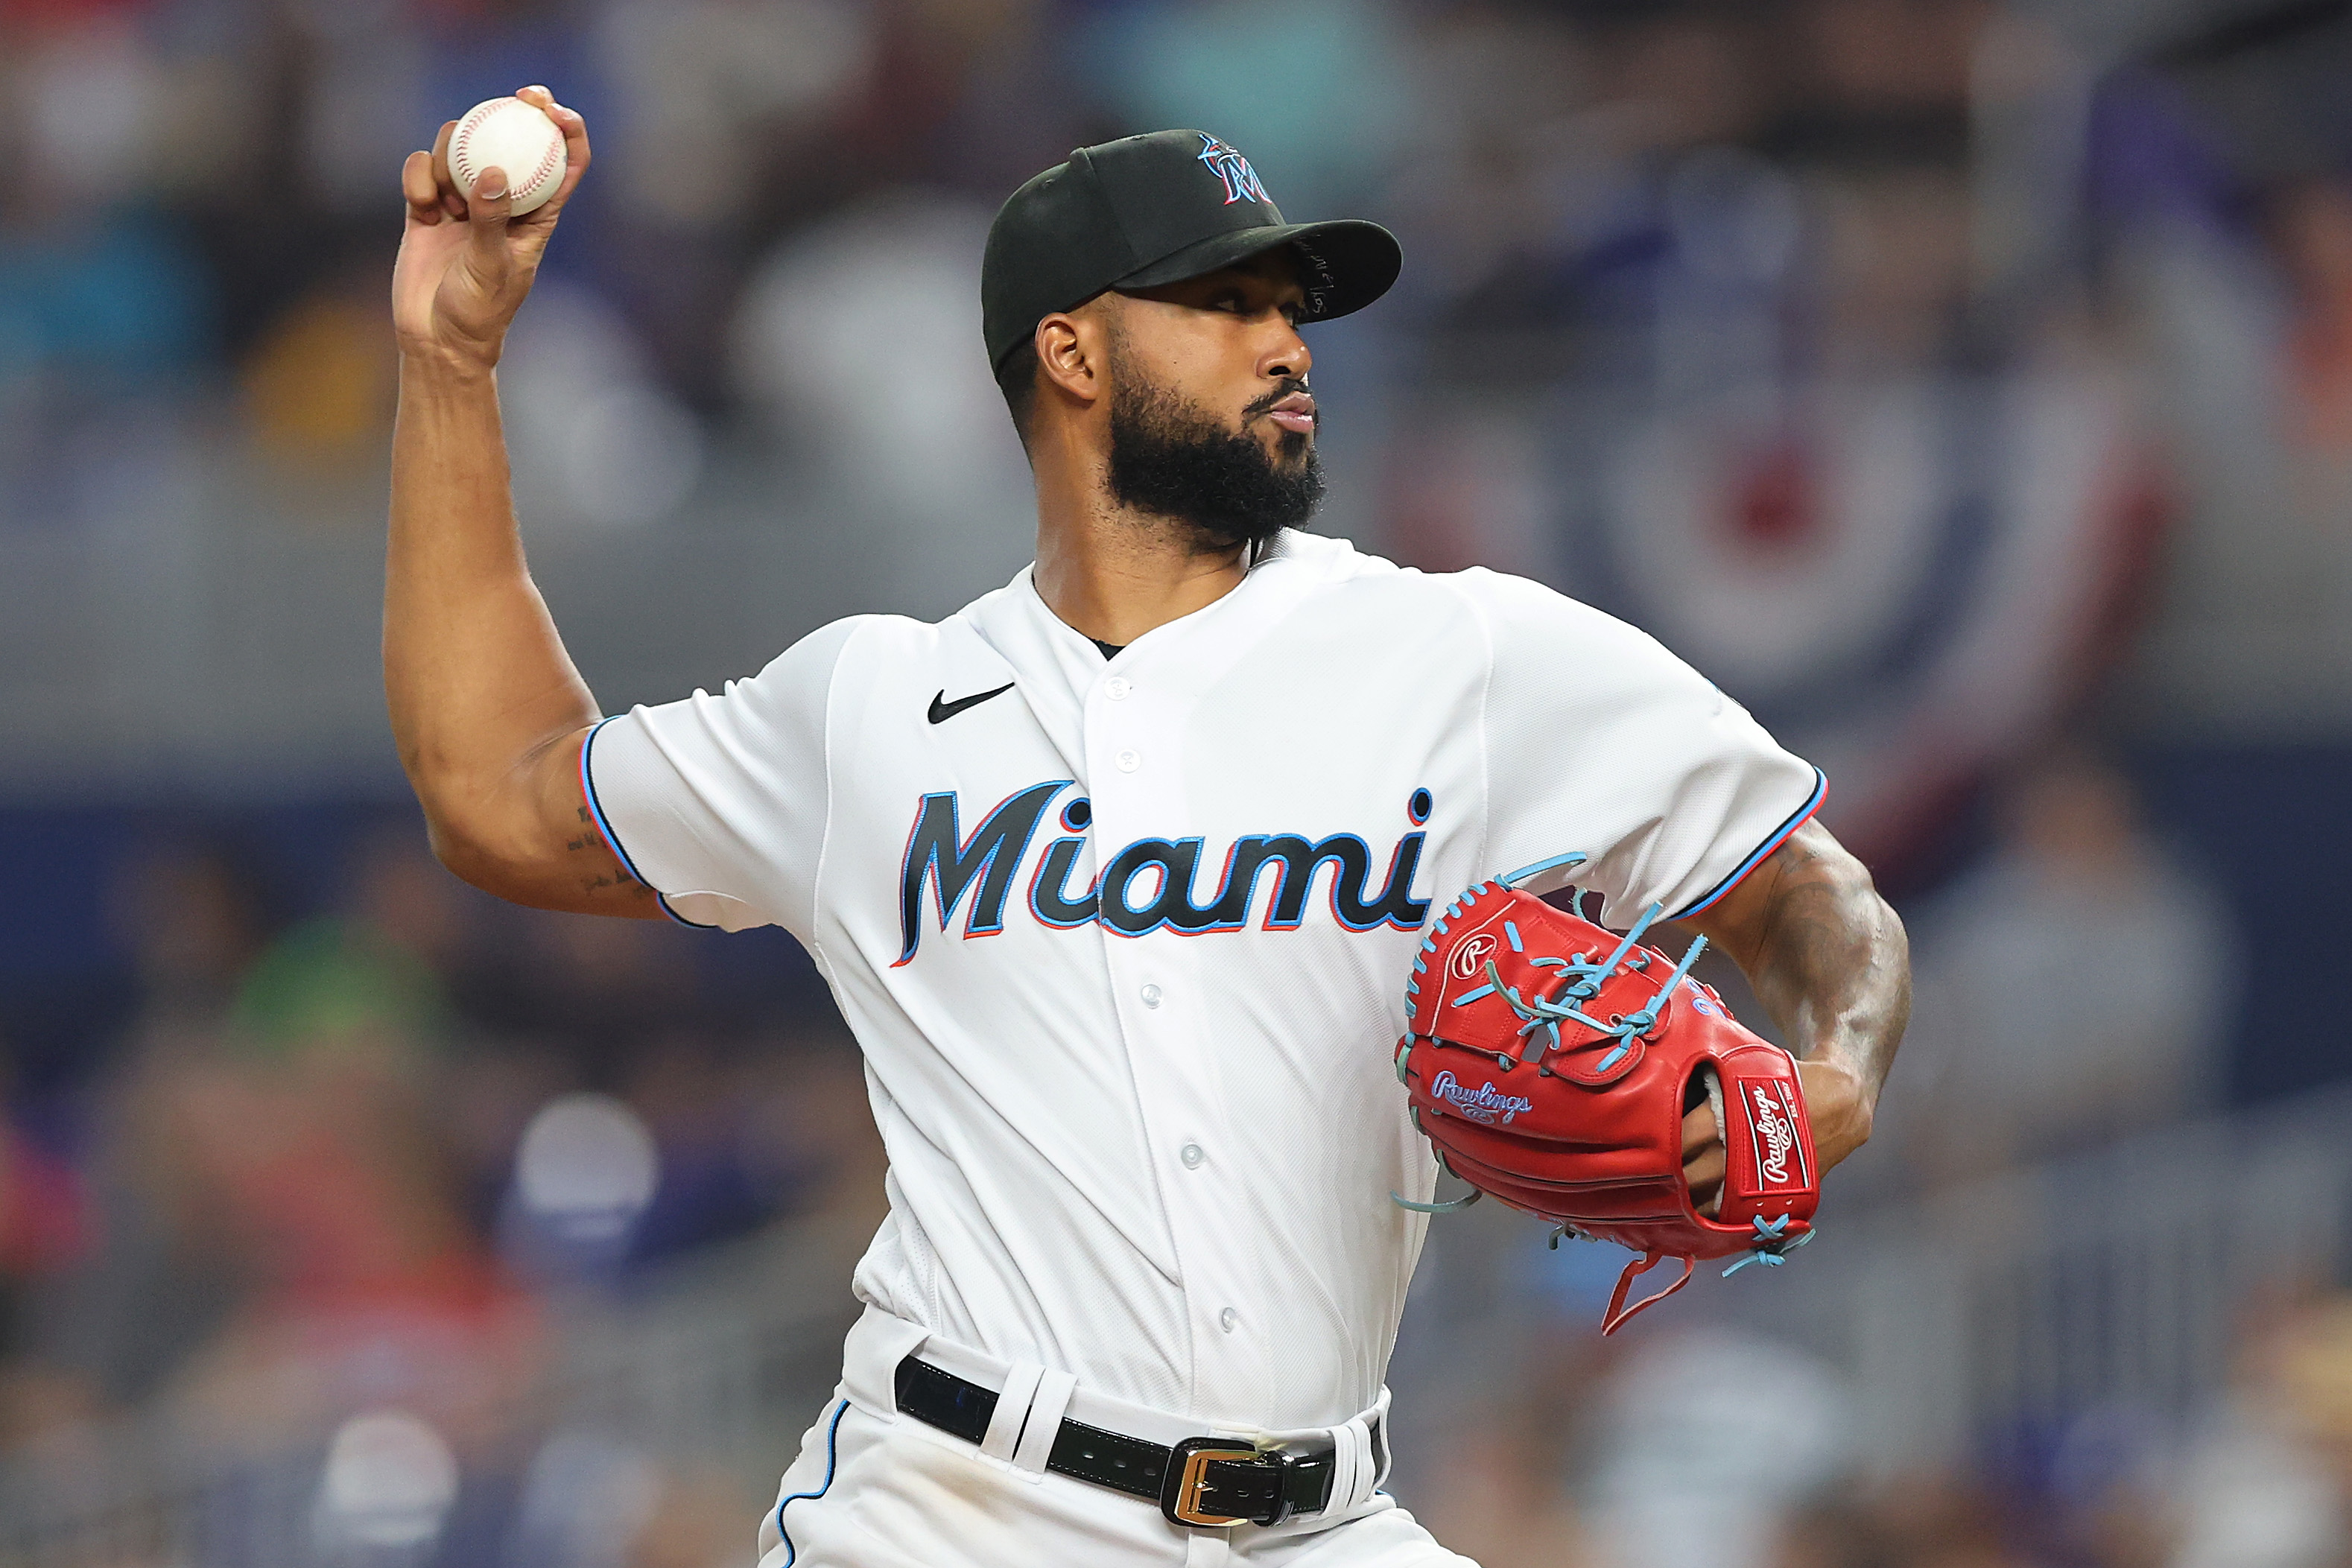 Marlins: 3 players who need bounce back seasons in 2023